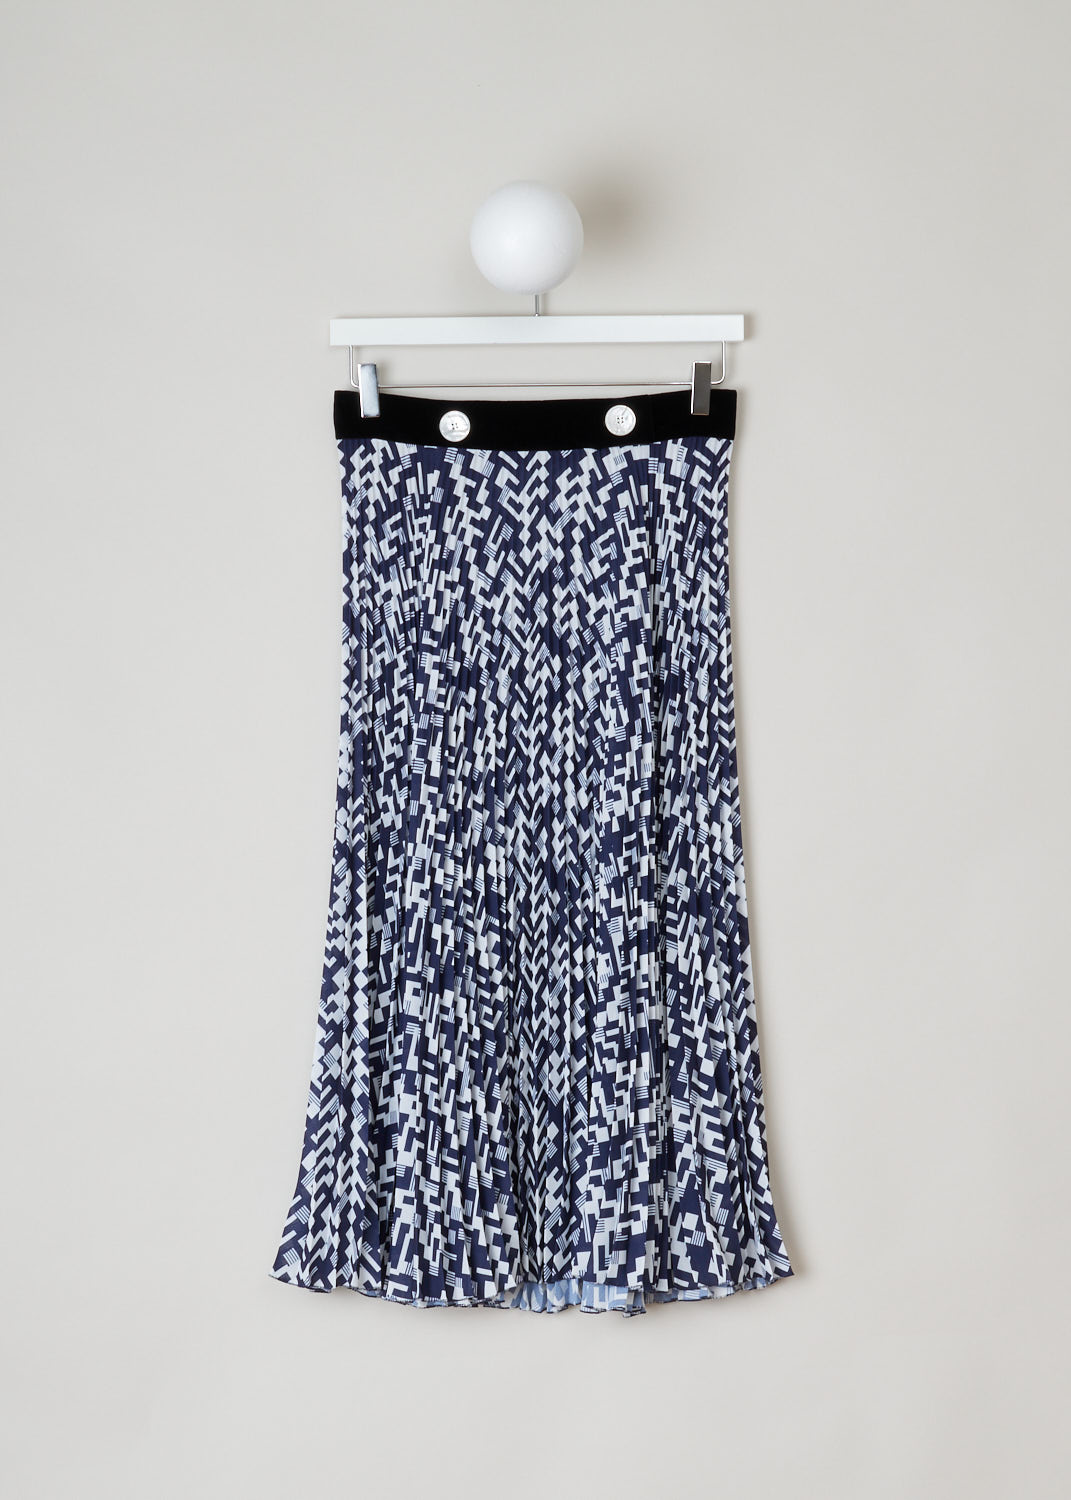 Prada, Geometric print skirt in blue and white, sable_leg_patte_P135R_F0216_baltico, blue, white, front, Geometric design with contrasting colors, which makes the print come to life. Featuring an accordion pleat model, and a waistband made from black velvet material with two ivory colored buttons. There is a concealed zipper on the back for fastening. 